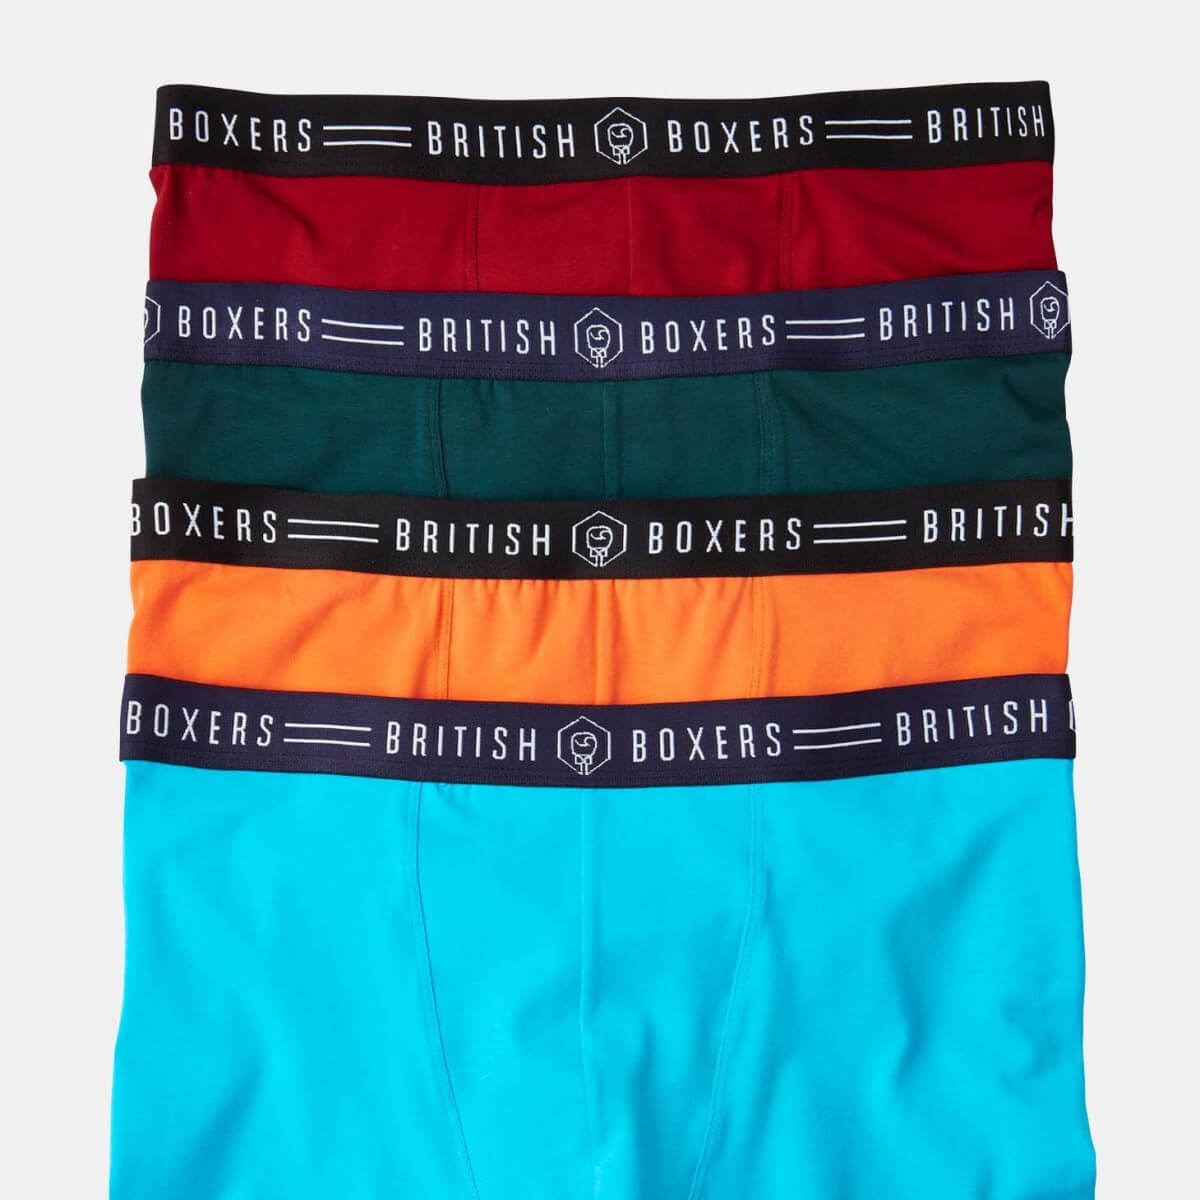 Image of Lucky Dip Boxers by British Boxers, designed, produced or made in the UK. Buying this product supports a UK business, jobs and the local community.